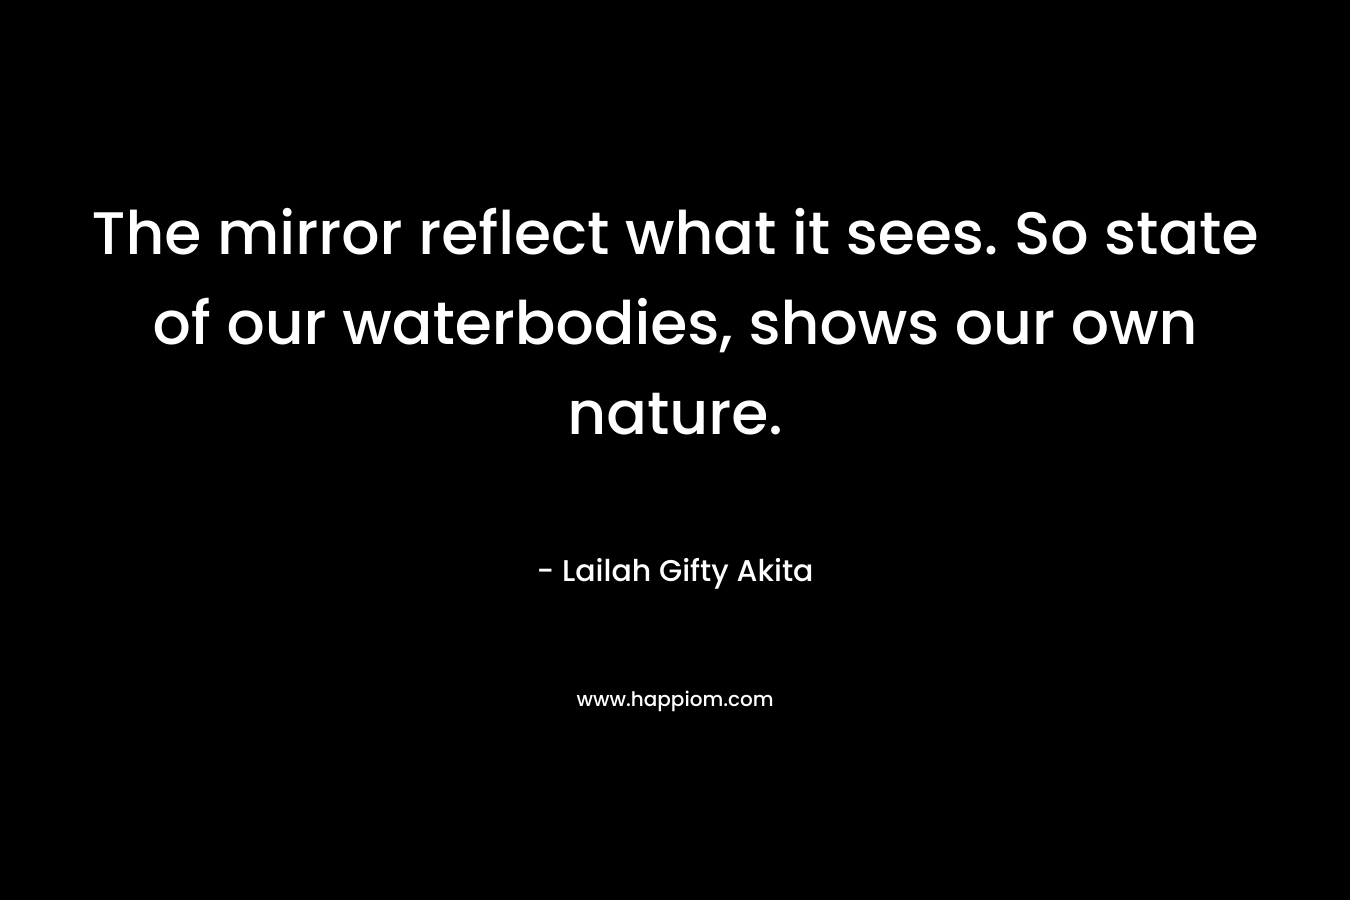 The mirror reflect what it sees. So state of our waterbodies, shows our own nature.